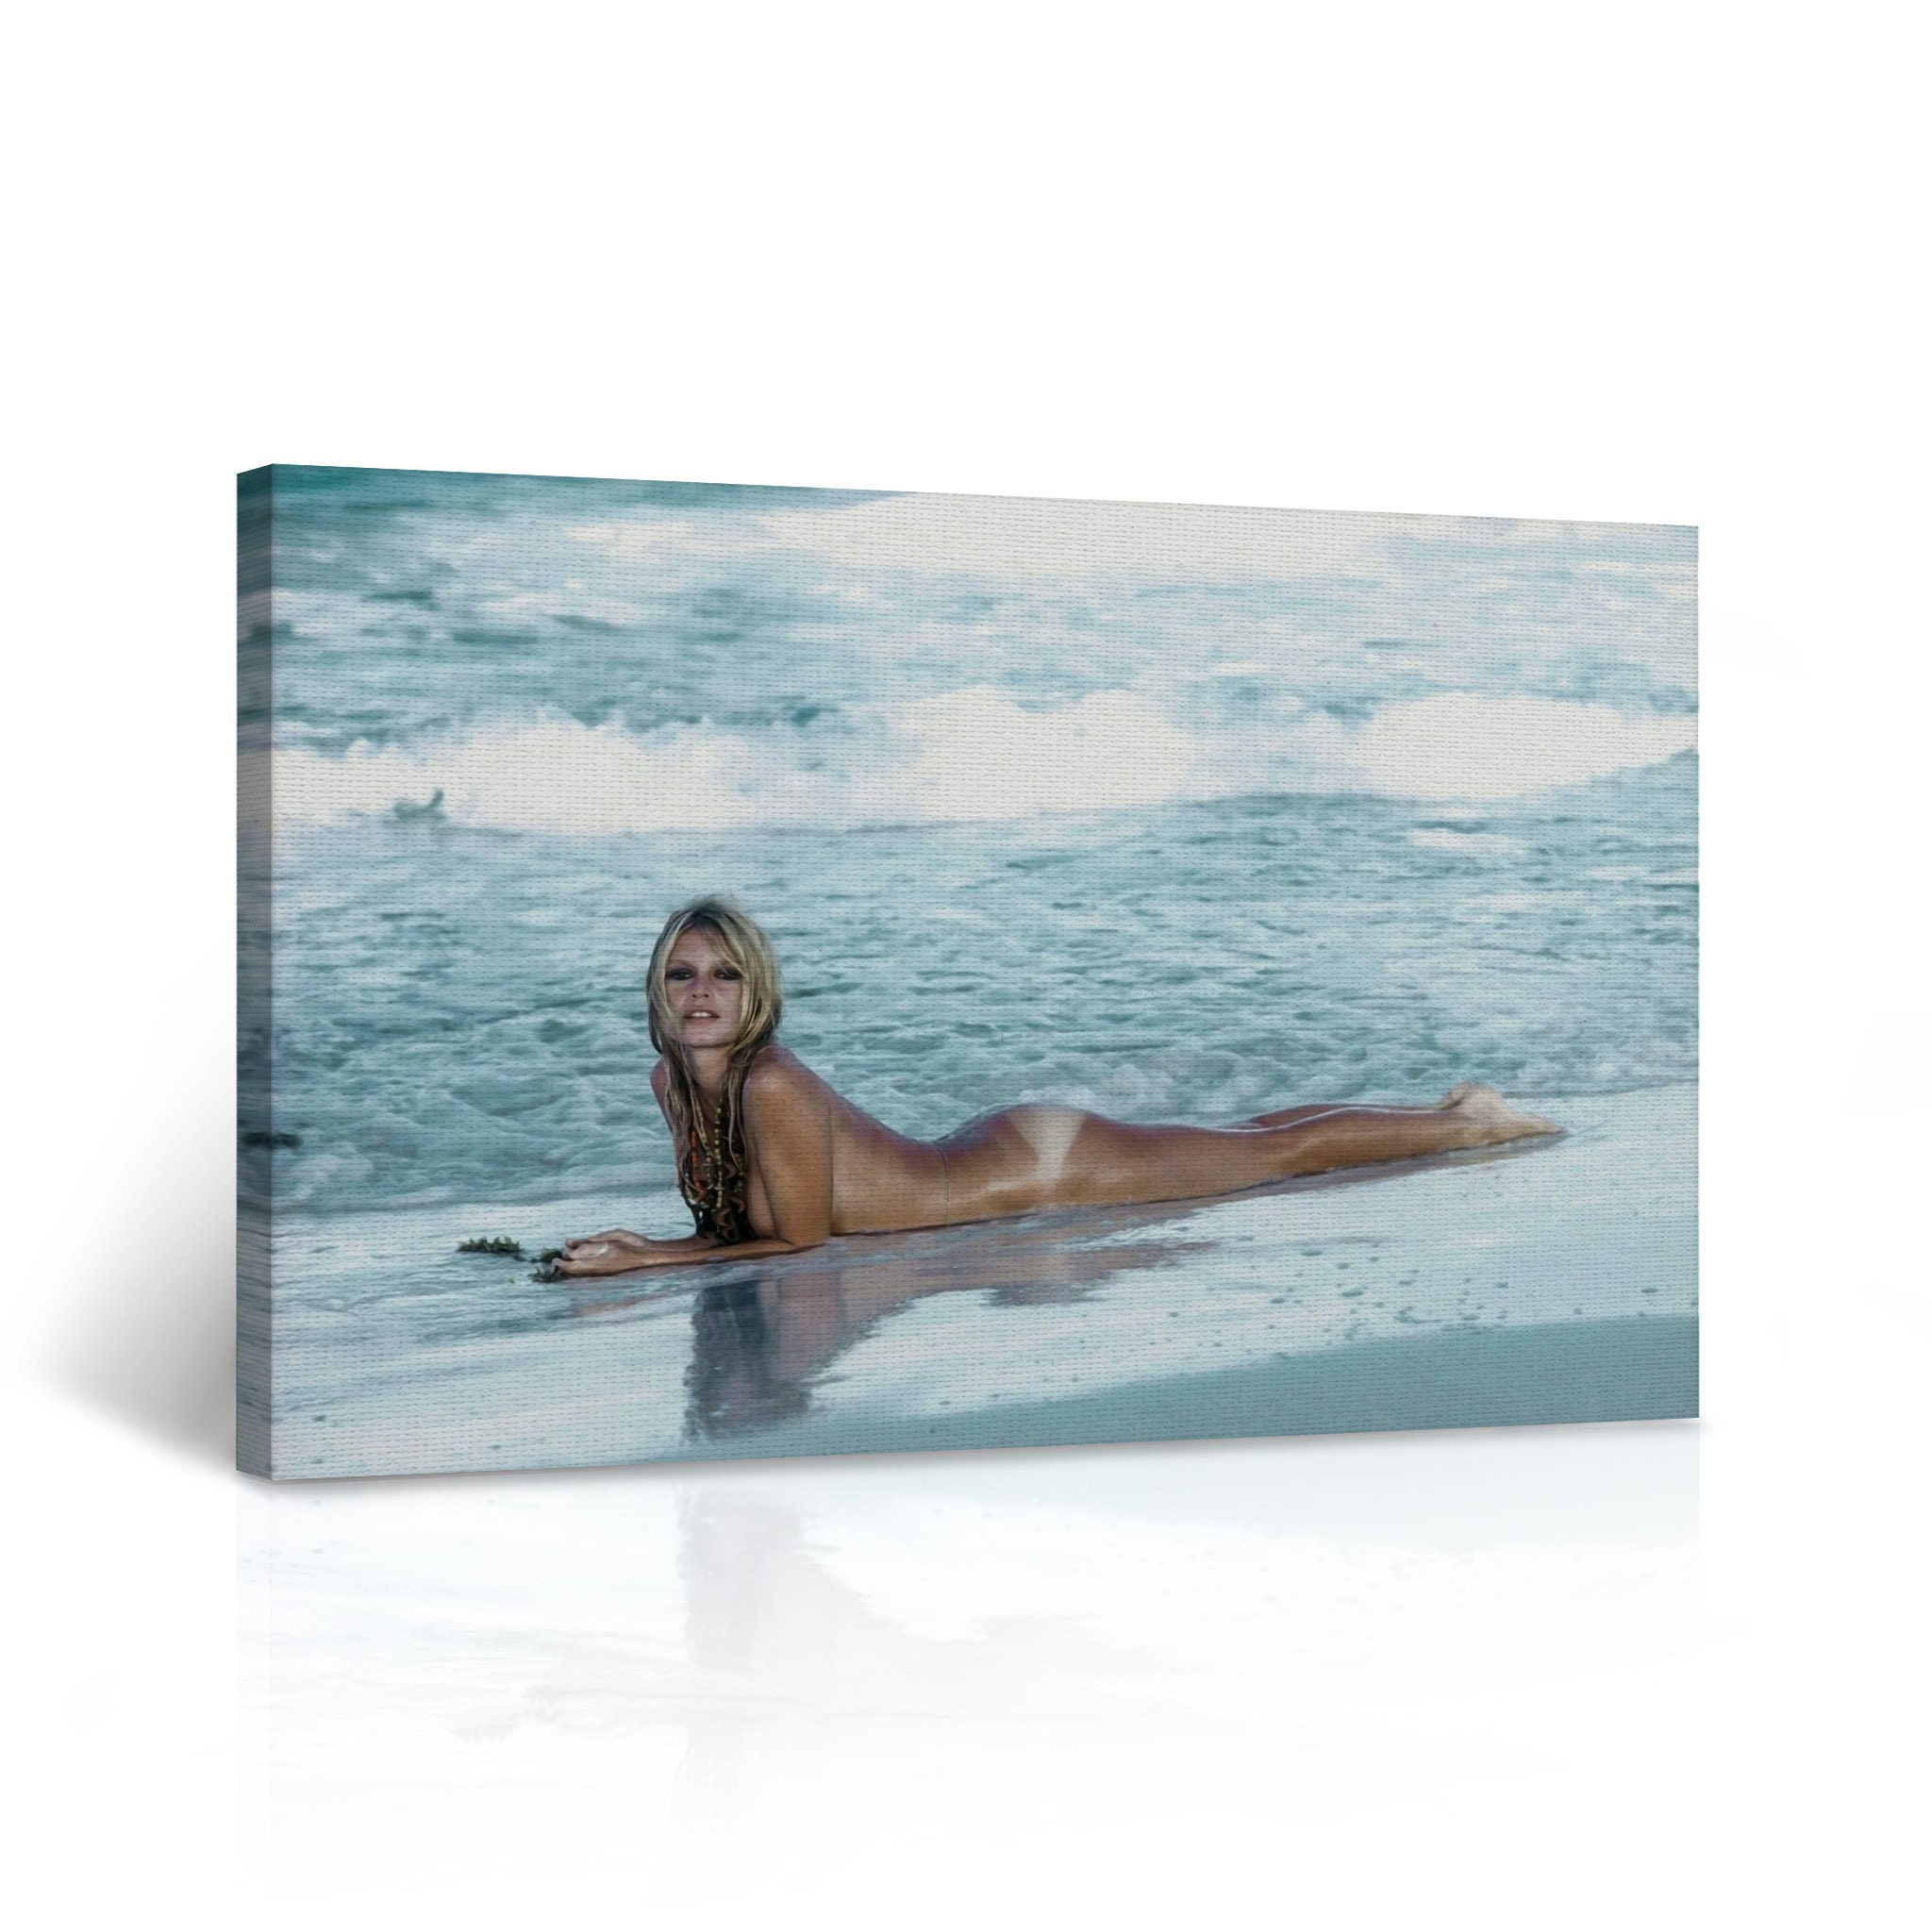 Brigitte Bardot Lying Naked on the Beach Nude Colored Canvas pic